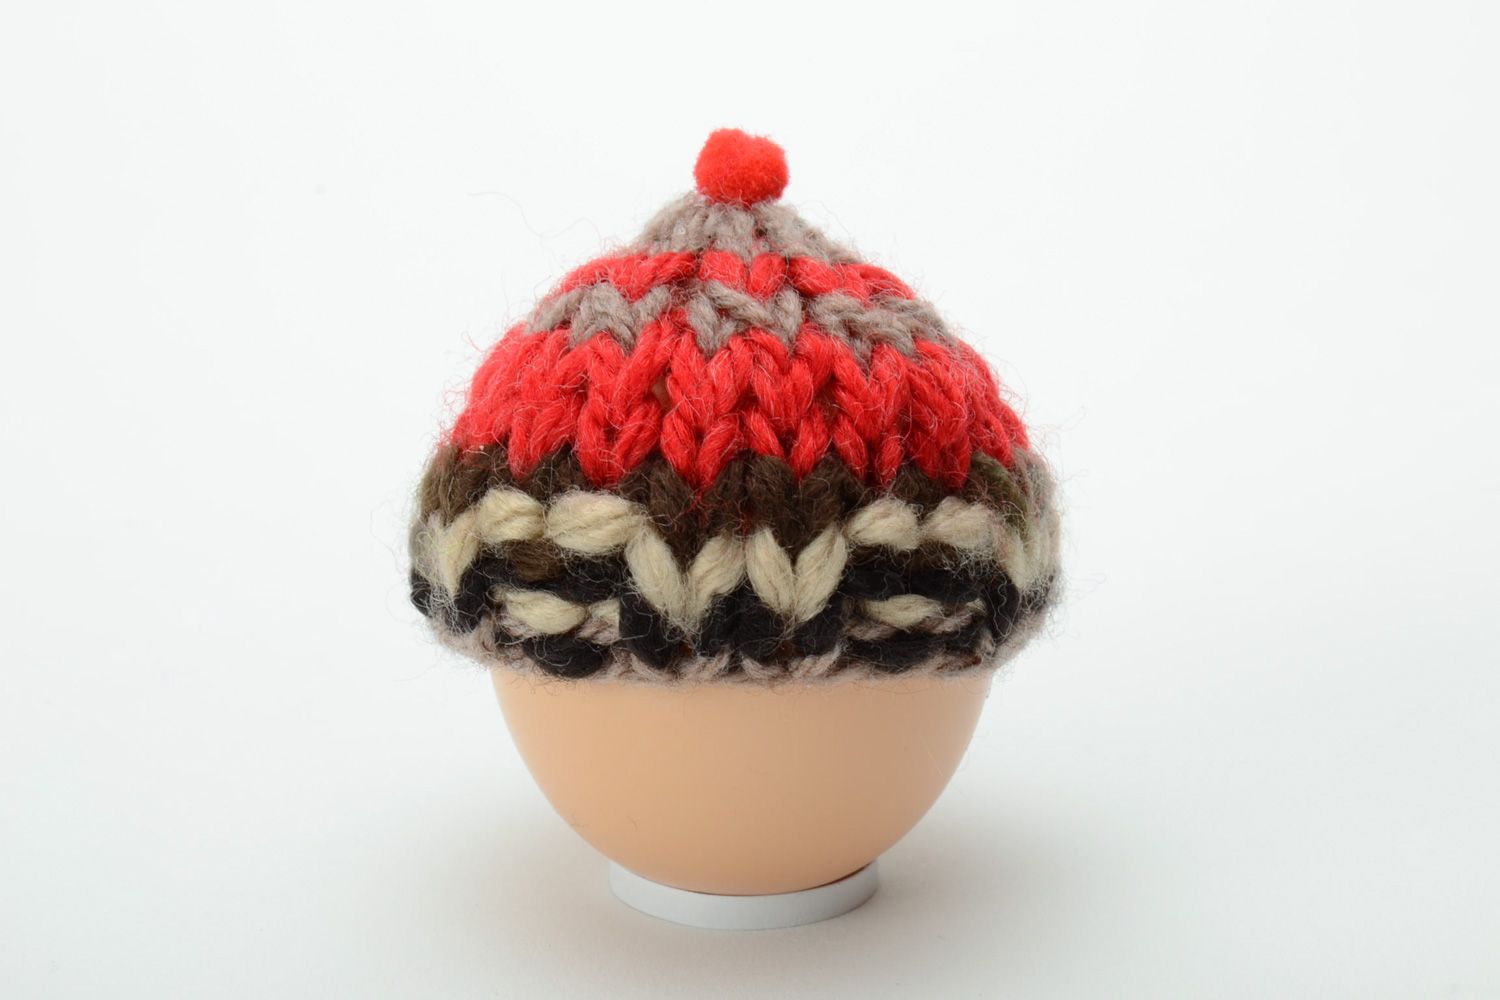 Knitted red hat for a baby toy. Two inches in diameter photo 2